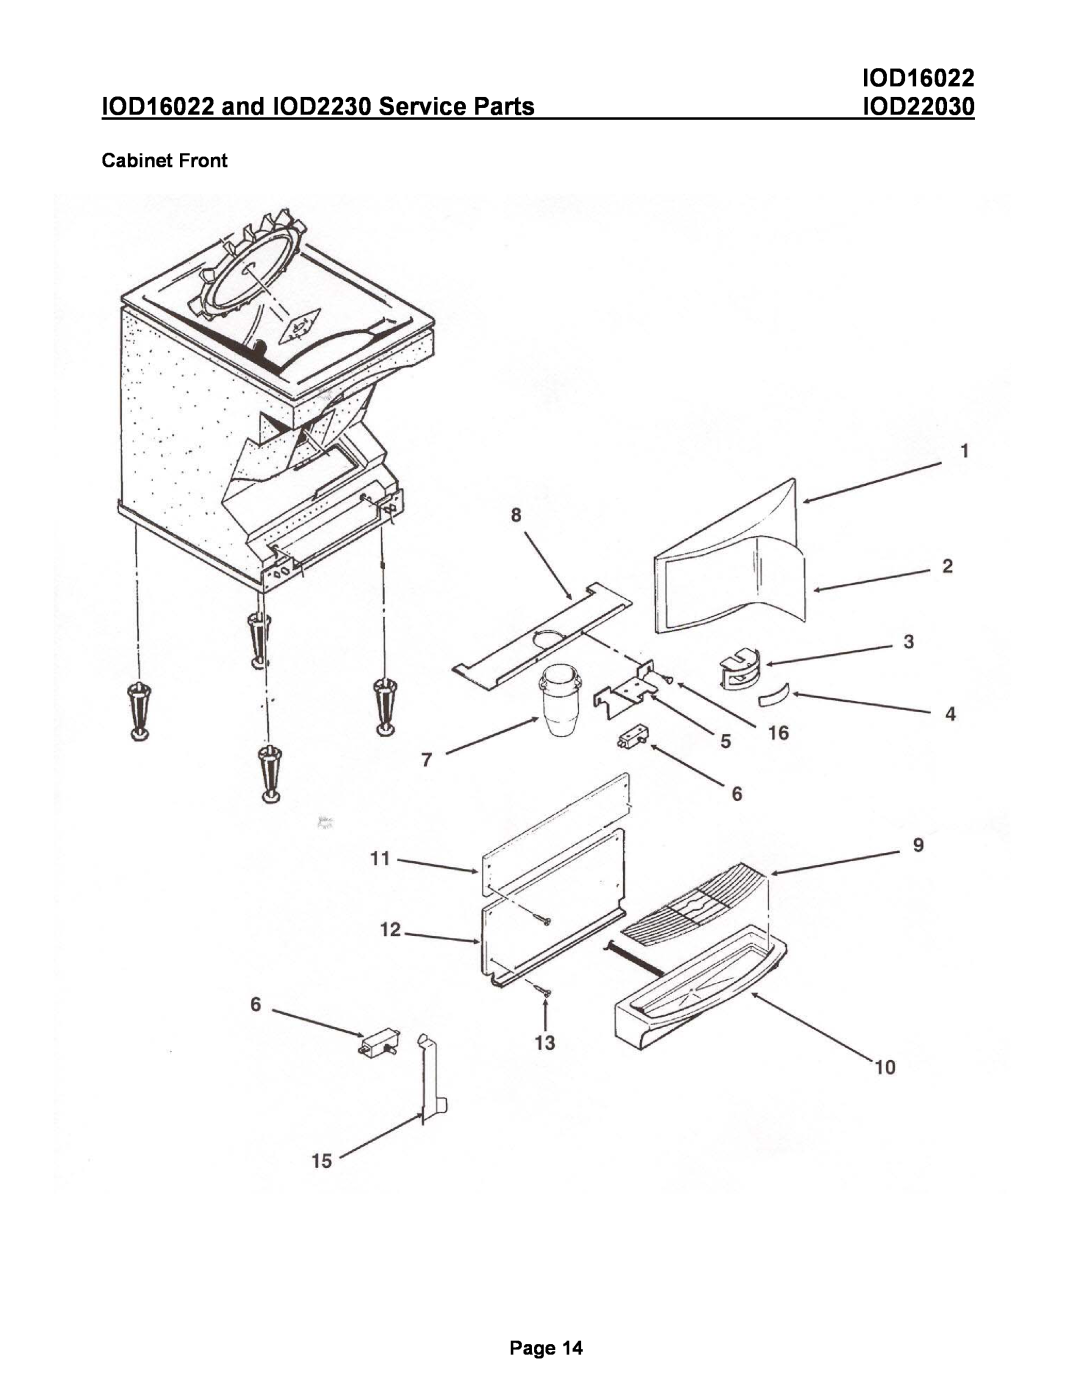 Ice-O-Matic IOD22030 manual Cabinet Front, IOD16022 and IOD2230 Service Parts, Page 